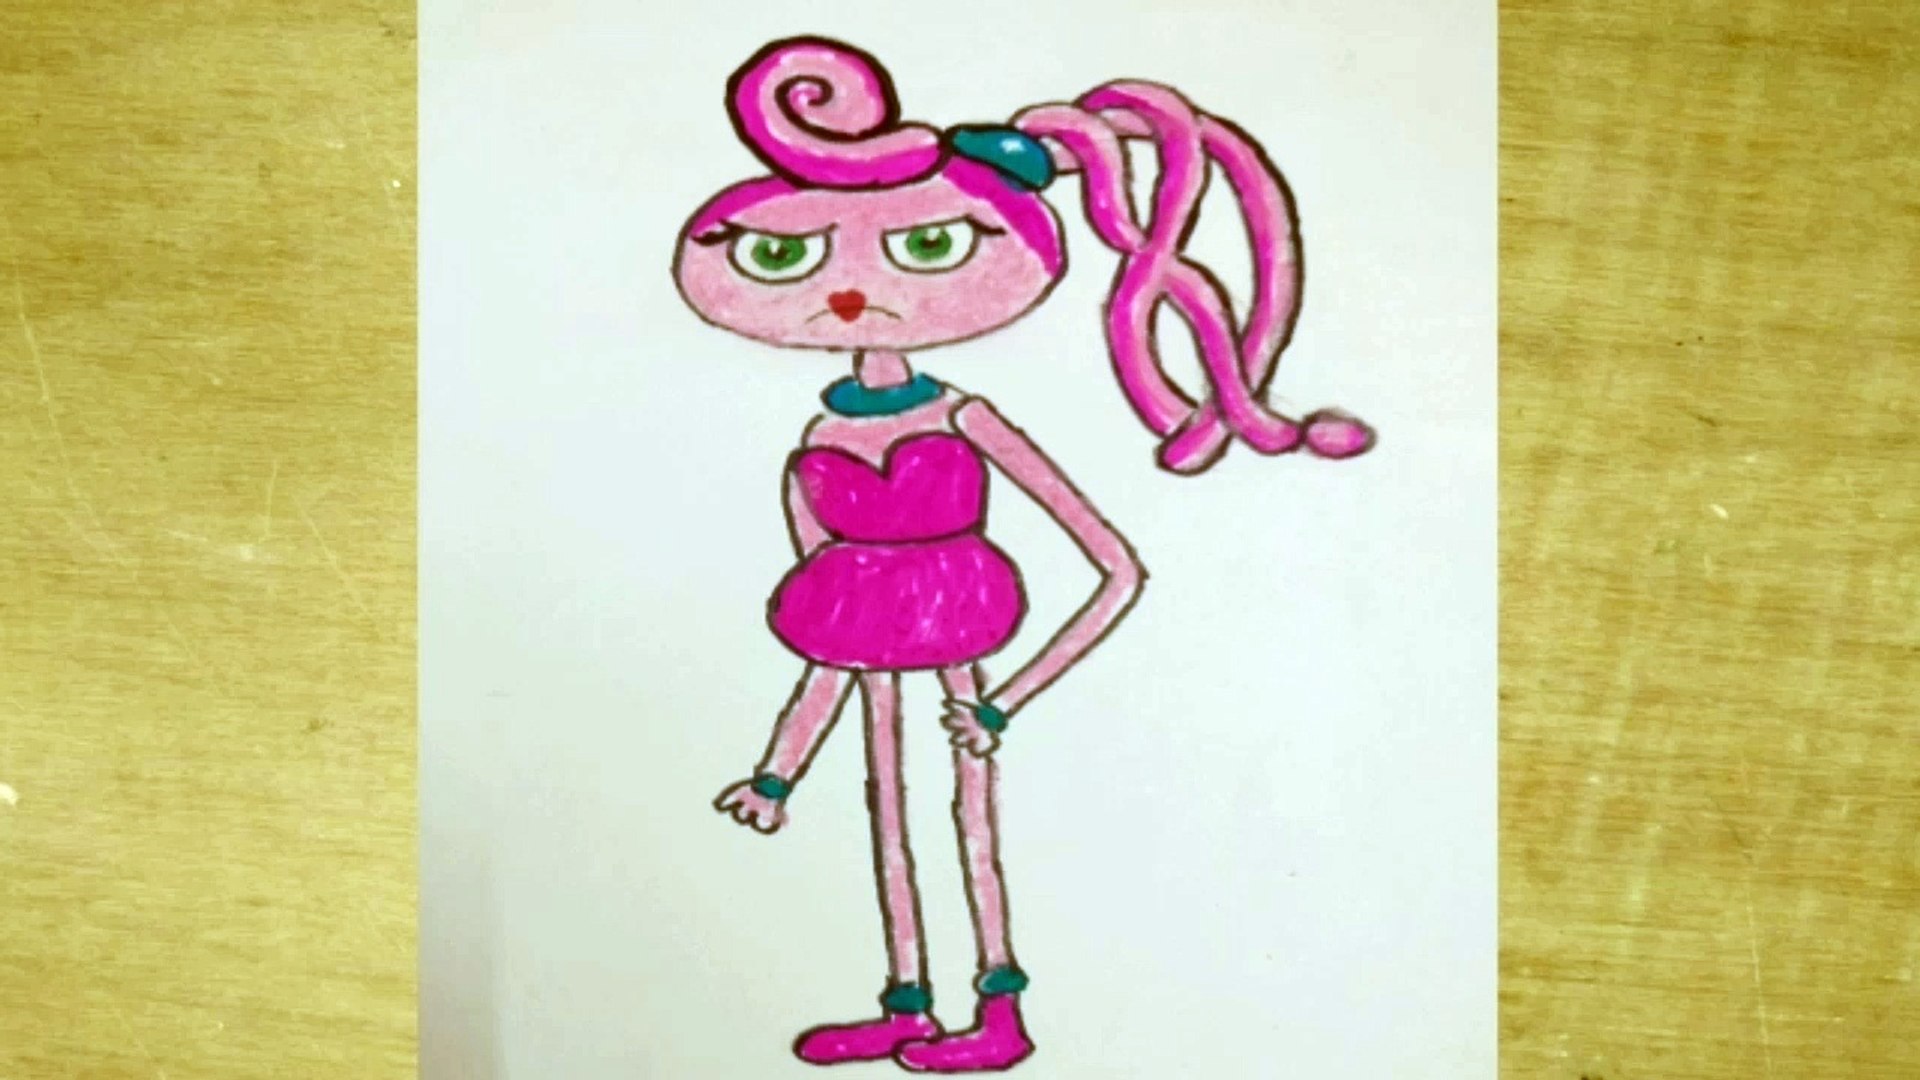 Mommy long legs (Poppy play time game) drawing - video Dailymotion